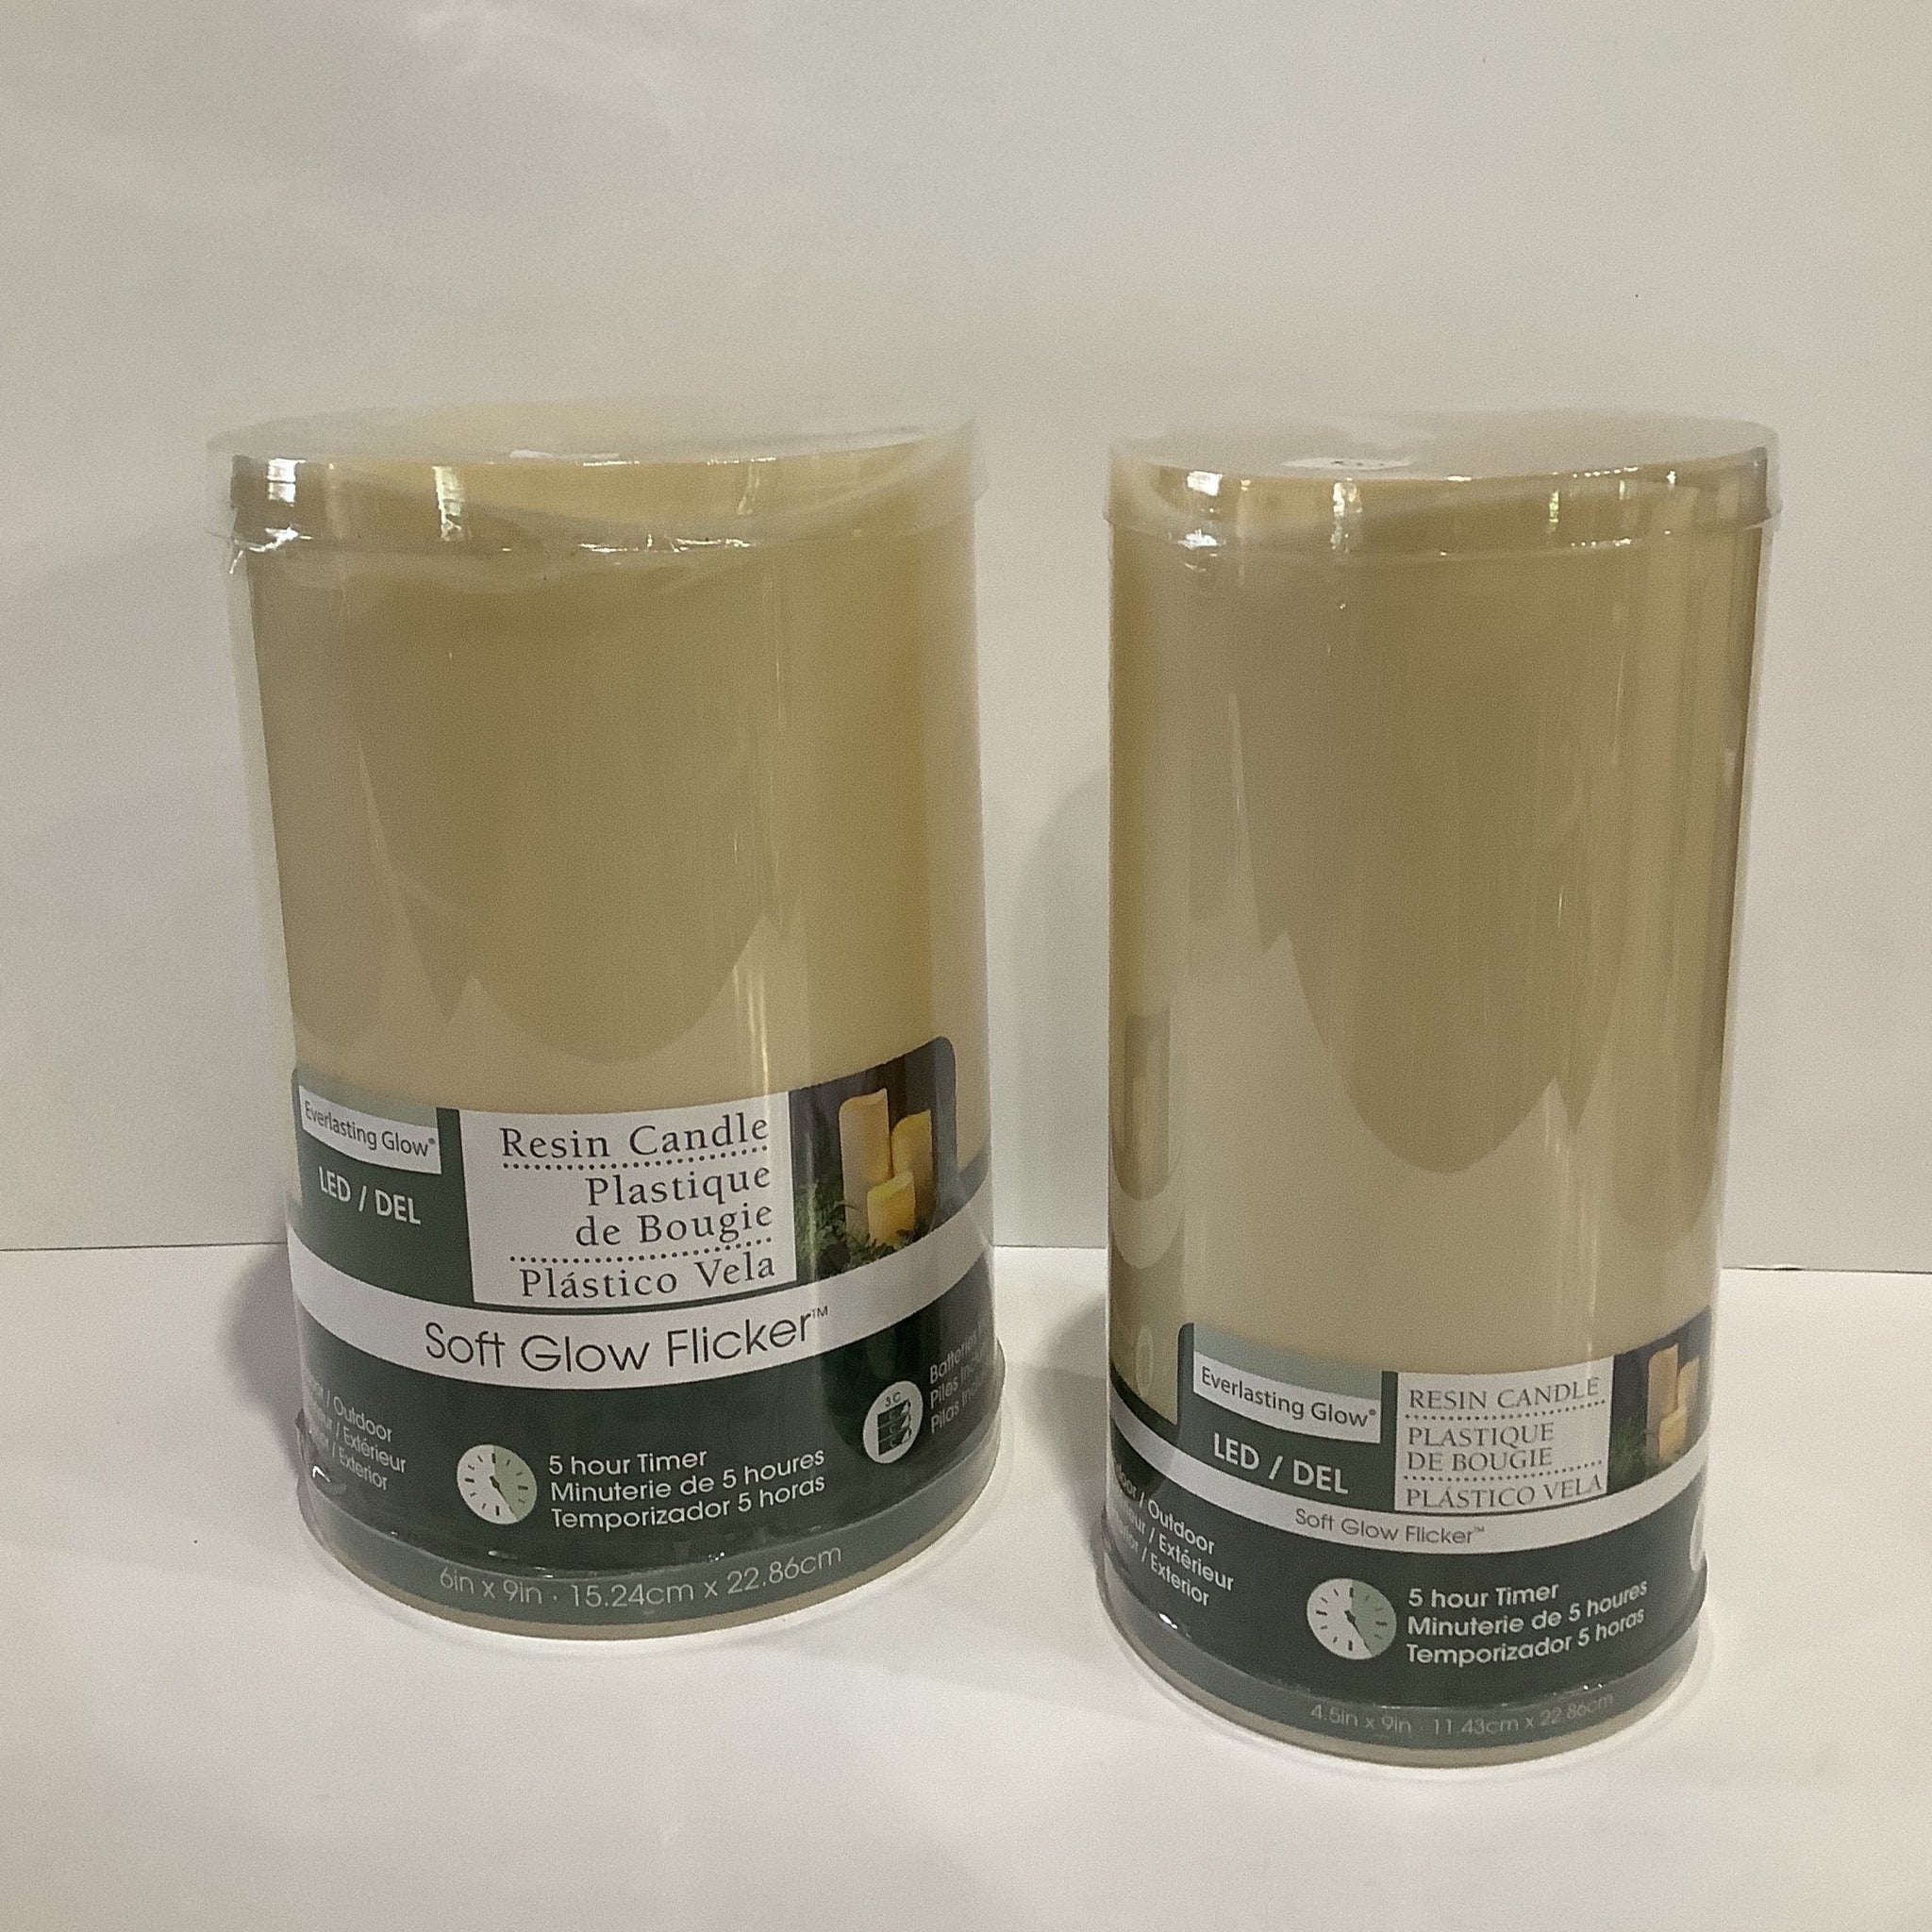 Resin candle (2 sizes)